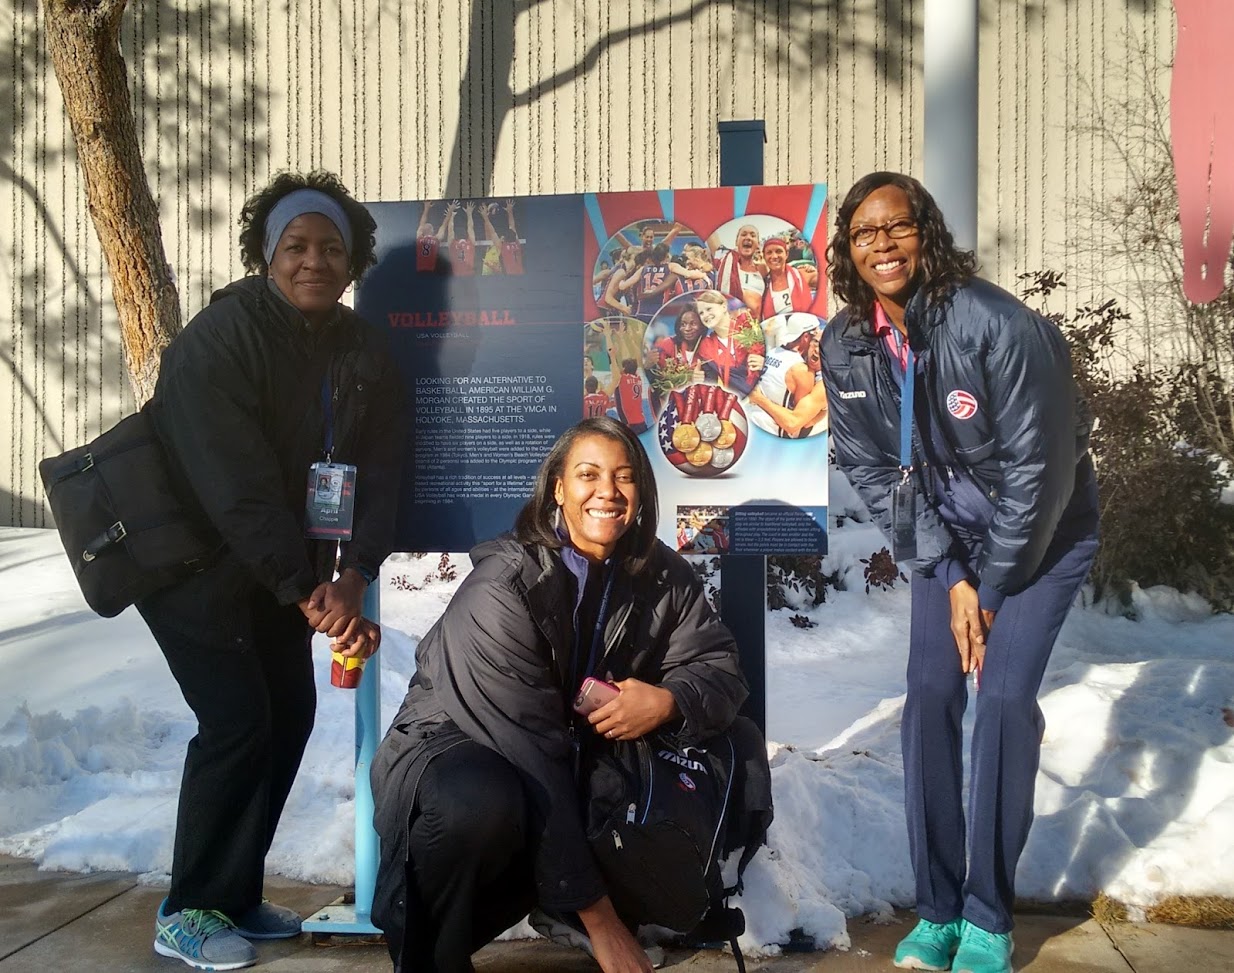 USA National and Olympic Team Players from left right April Chapple (Me) 4x Olympian Danielle Scott and 2x-time Olympian Kim Oden at USA Olympic Training Center.